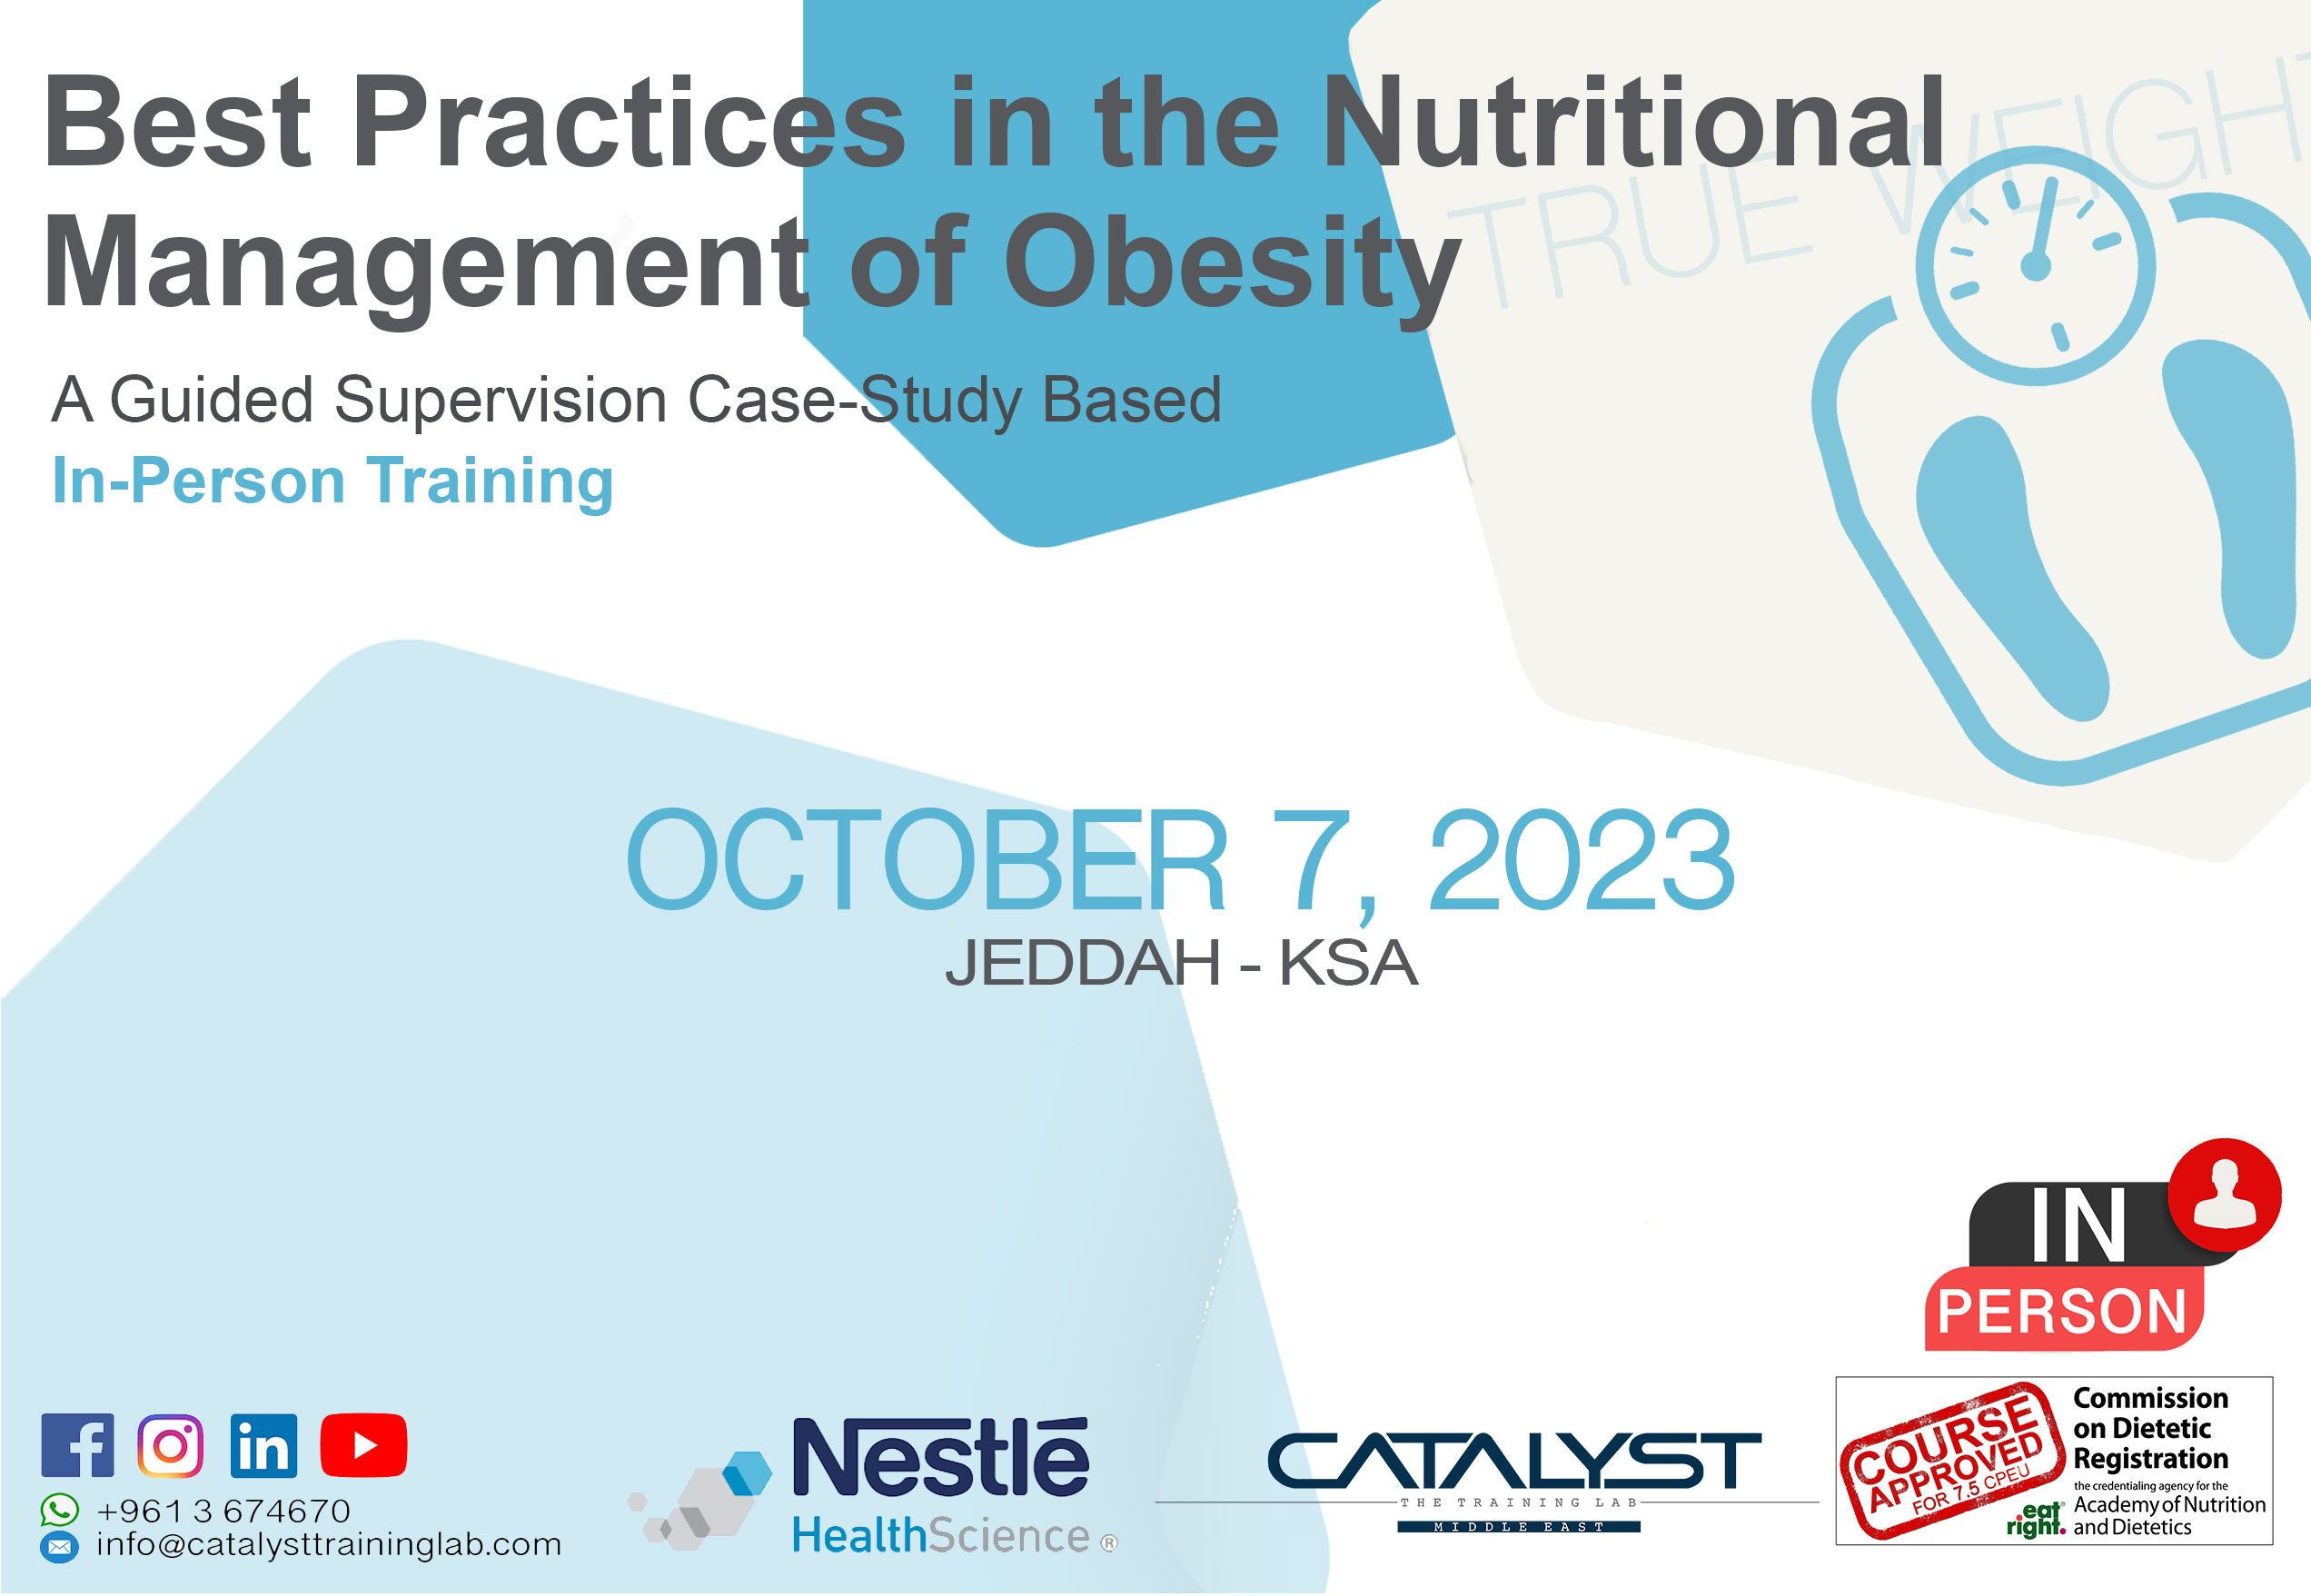 Best Practices in the Nutritional Management of Obesity - Jeddah